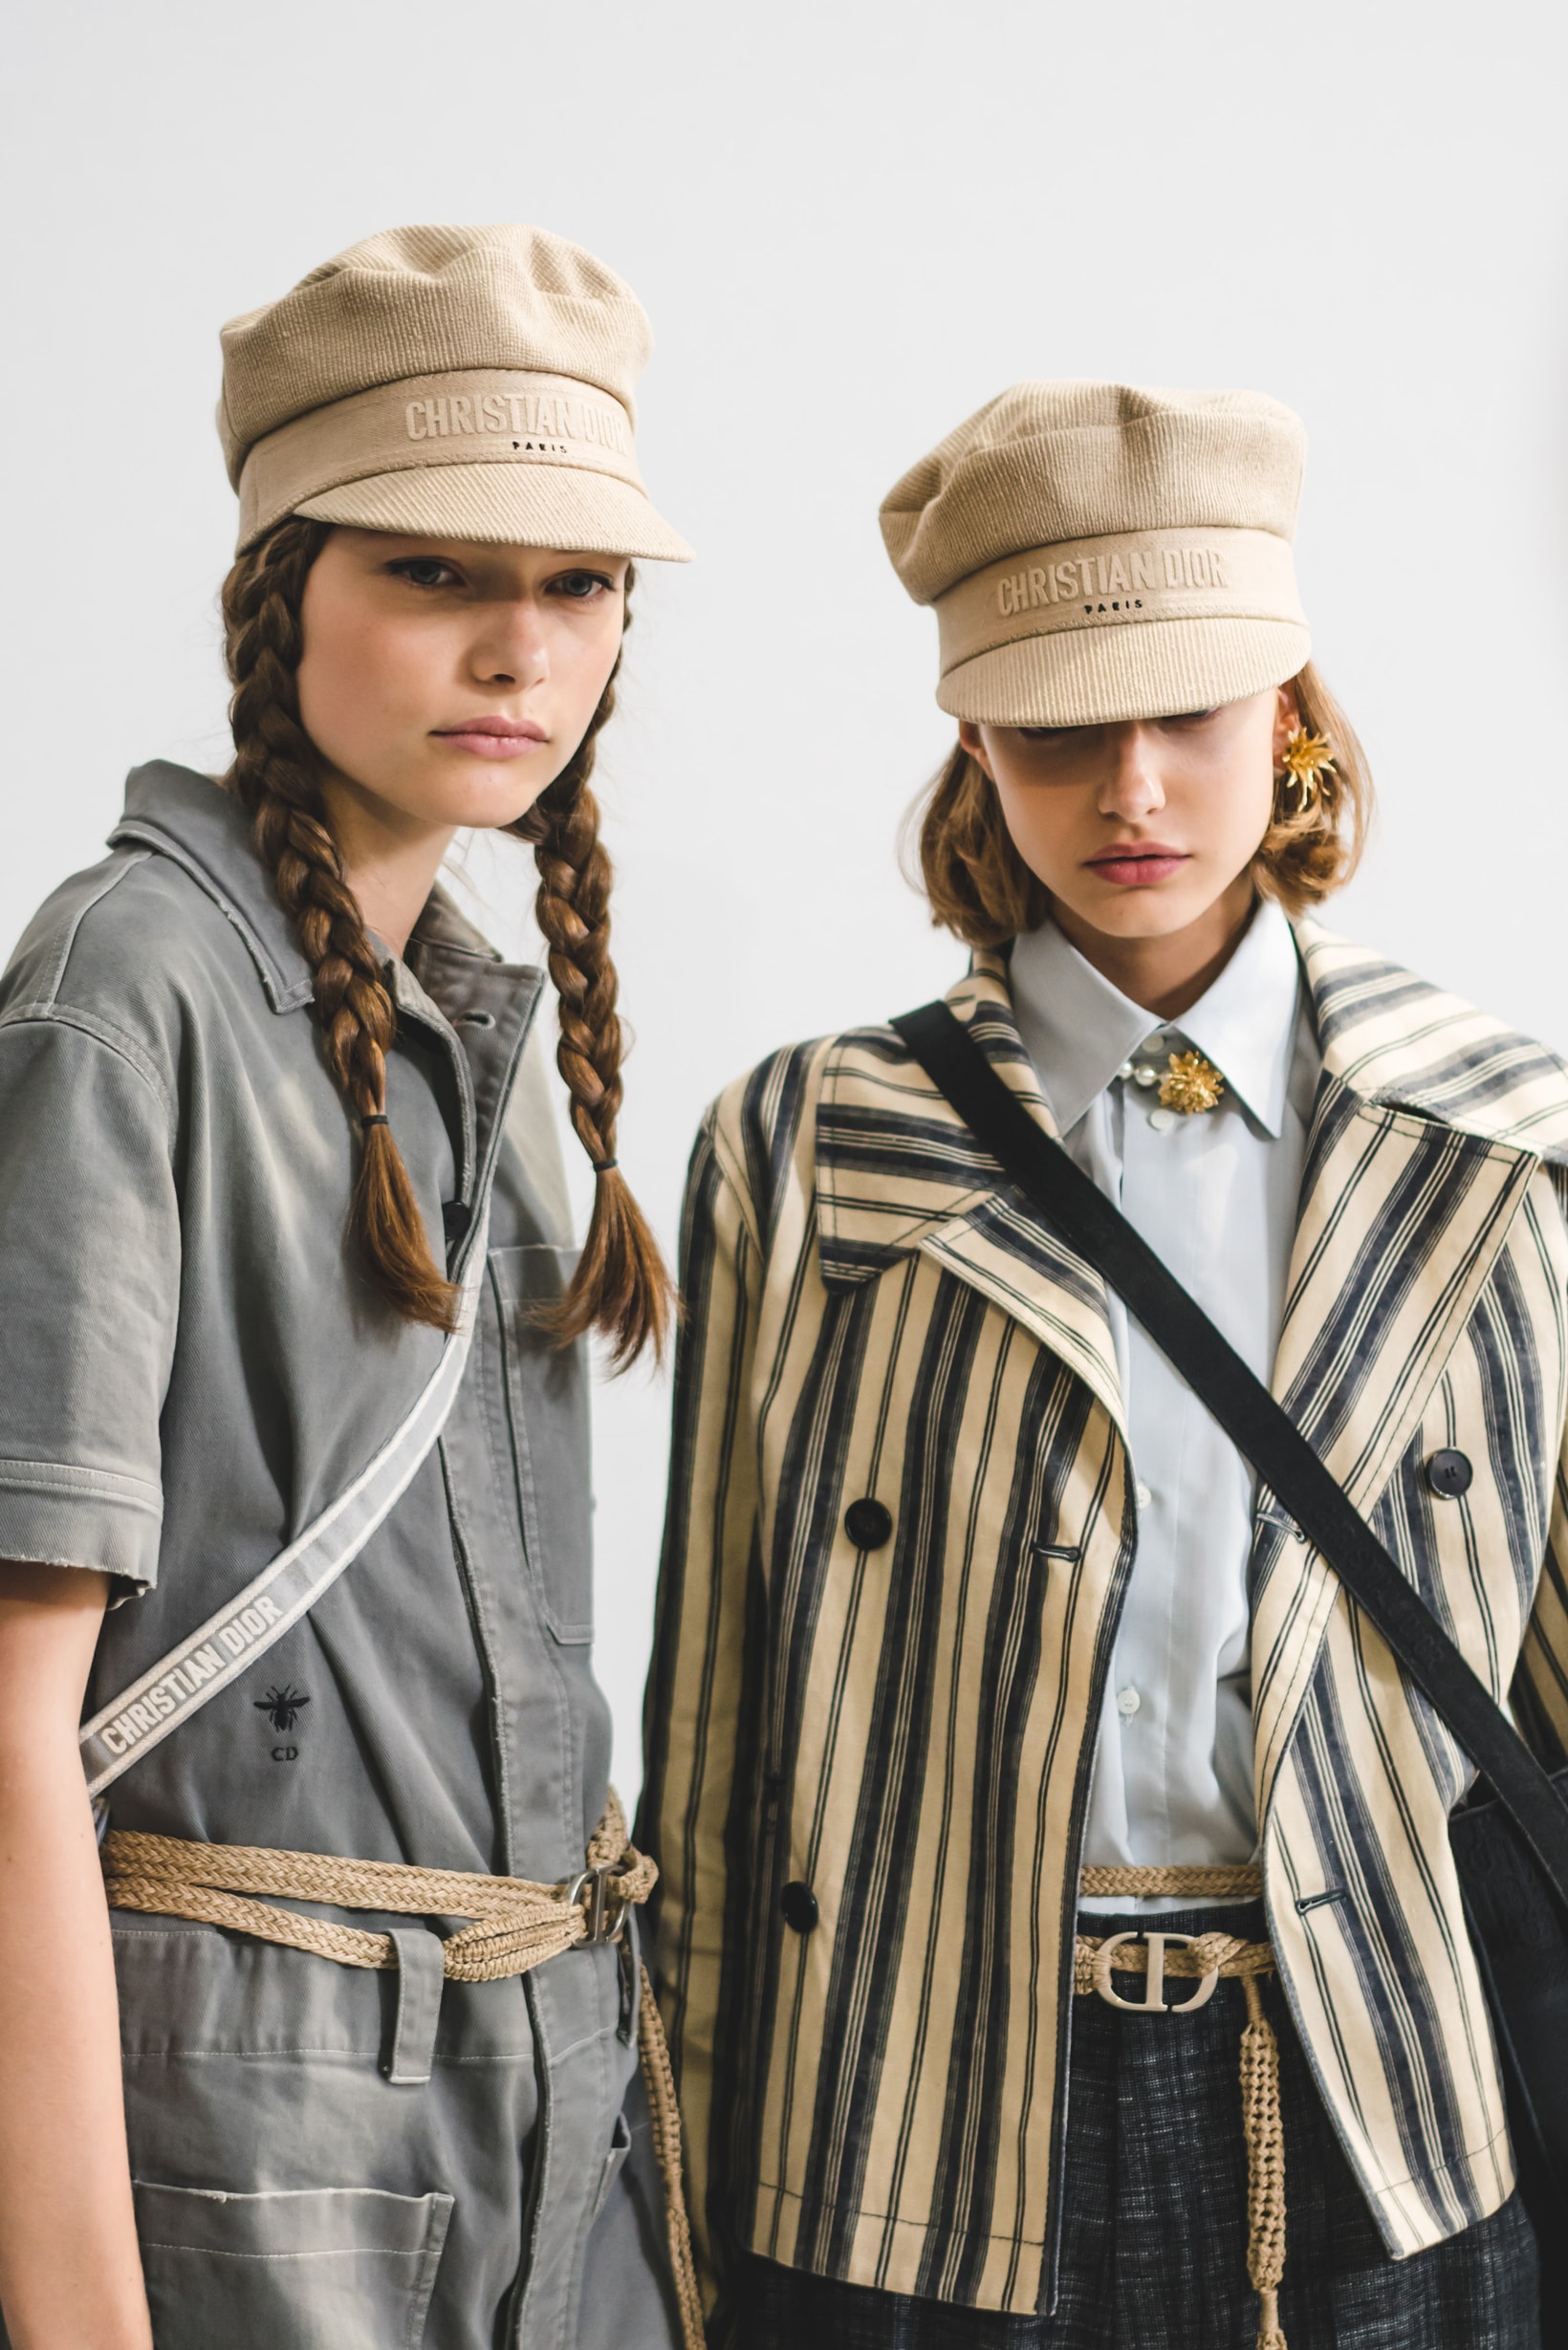 Dior Spring Summer 2020 Paris Fashion Week Collection Show Backstage Look Jackets Hats Tan